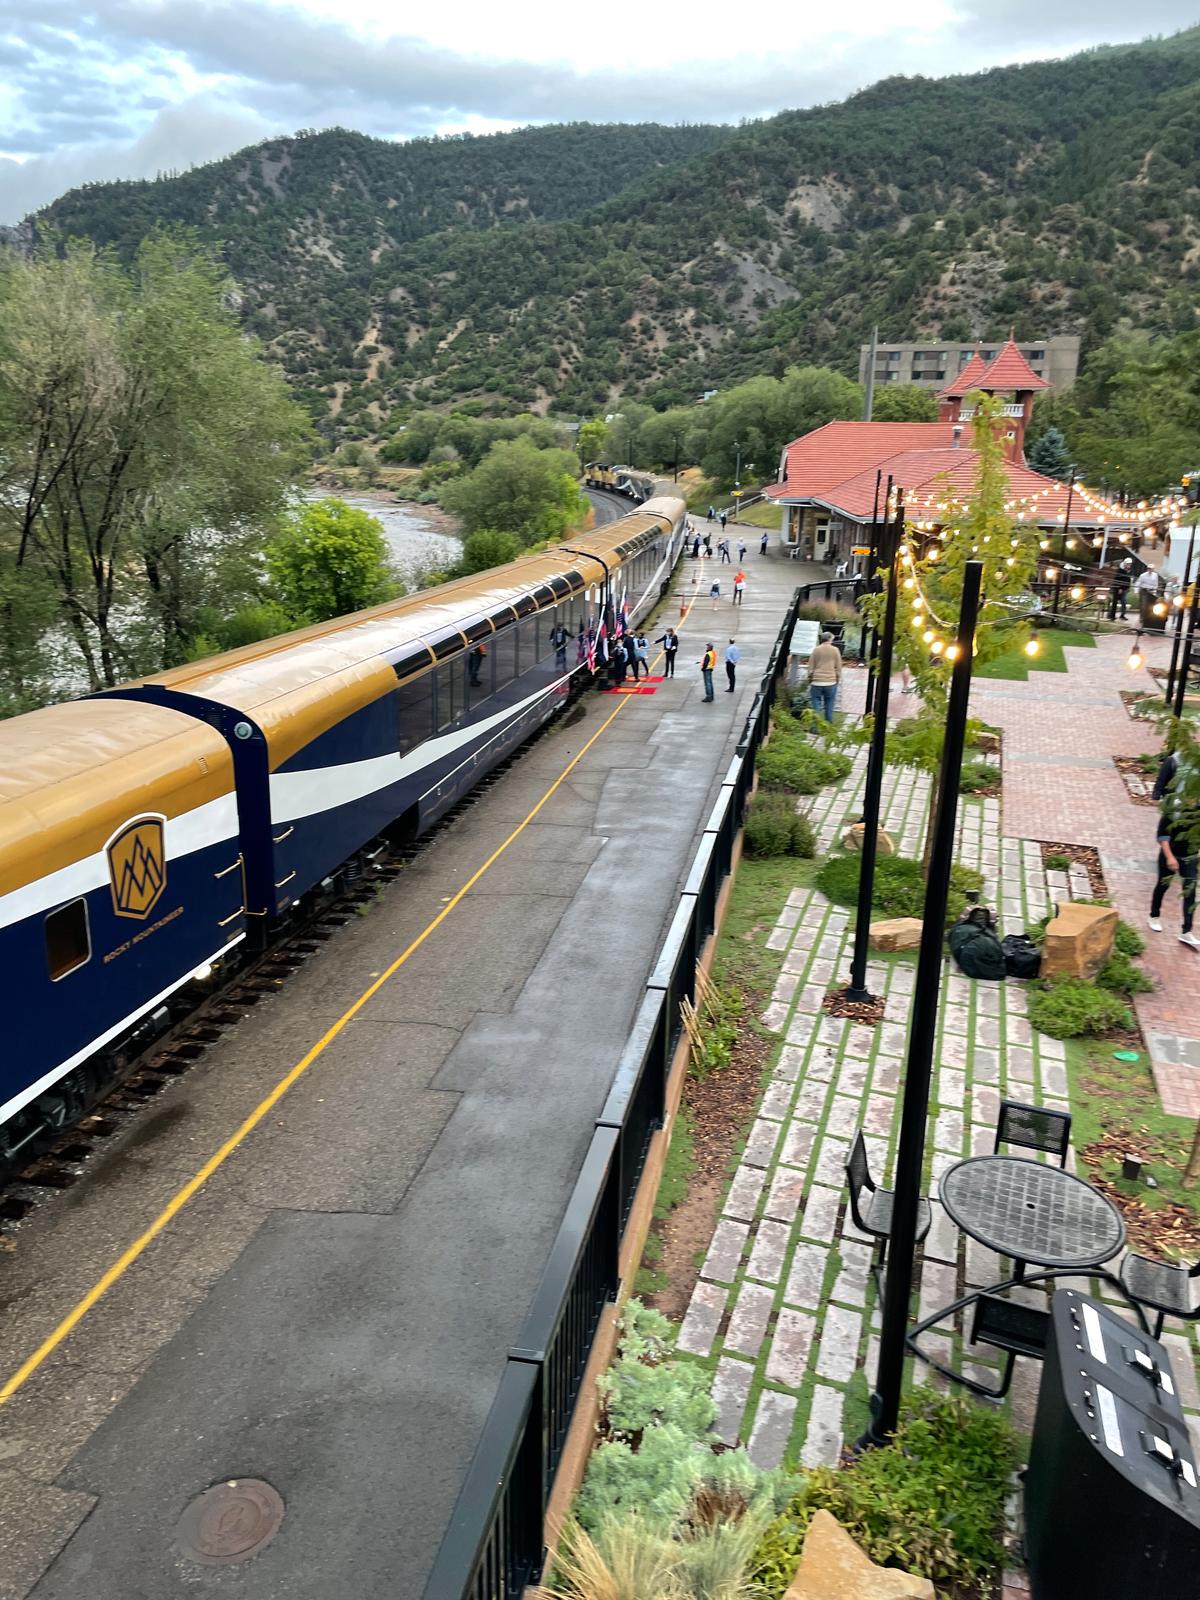 The train arrives in in Glenwood Springs, Colo. (Janna Graber)